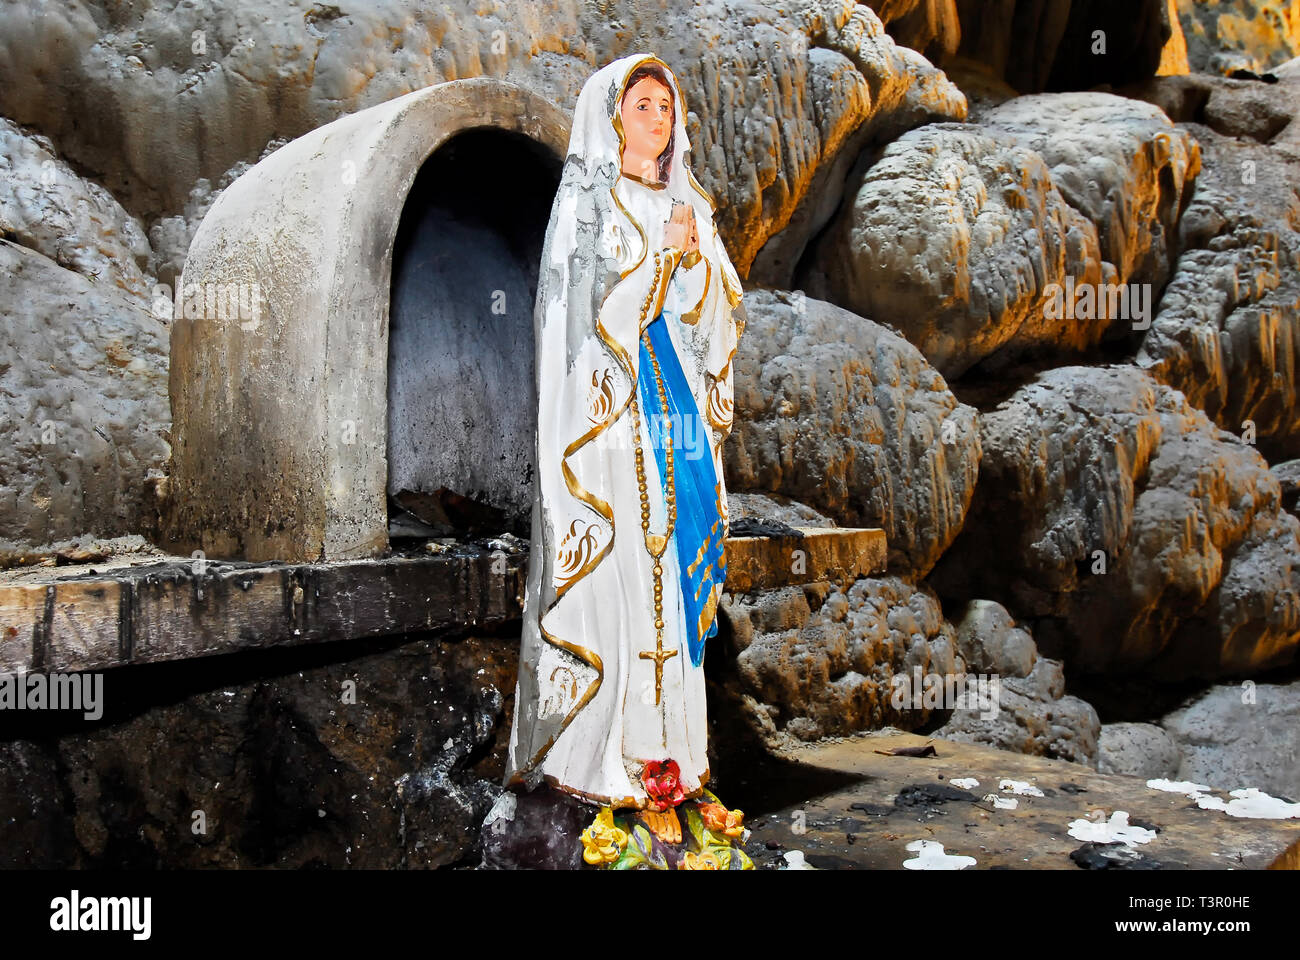 Penablanca, Cagayan Province, Philippines - May 19, 2008: Statue of Mother Mary inside Callao Cave with a church built in the first chamber Stock Photo